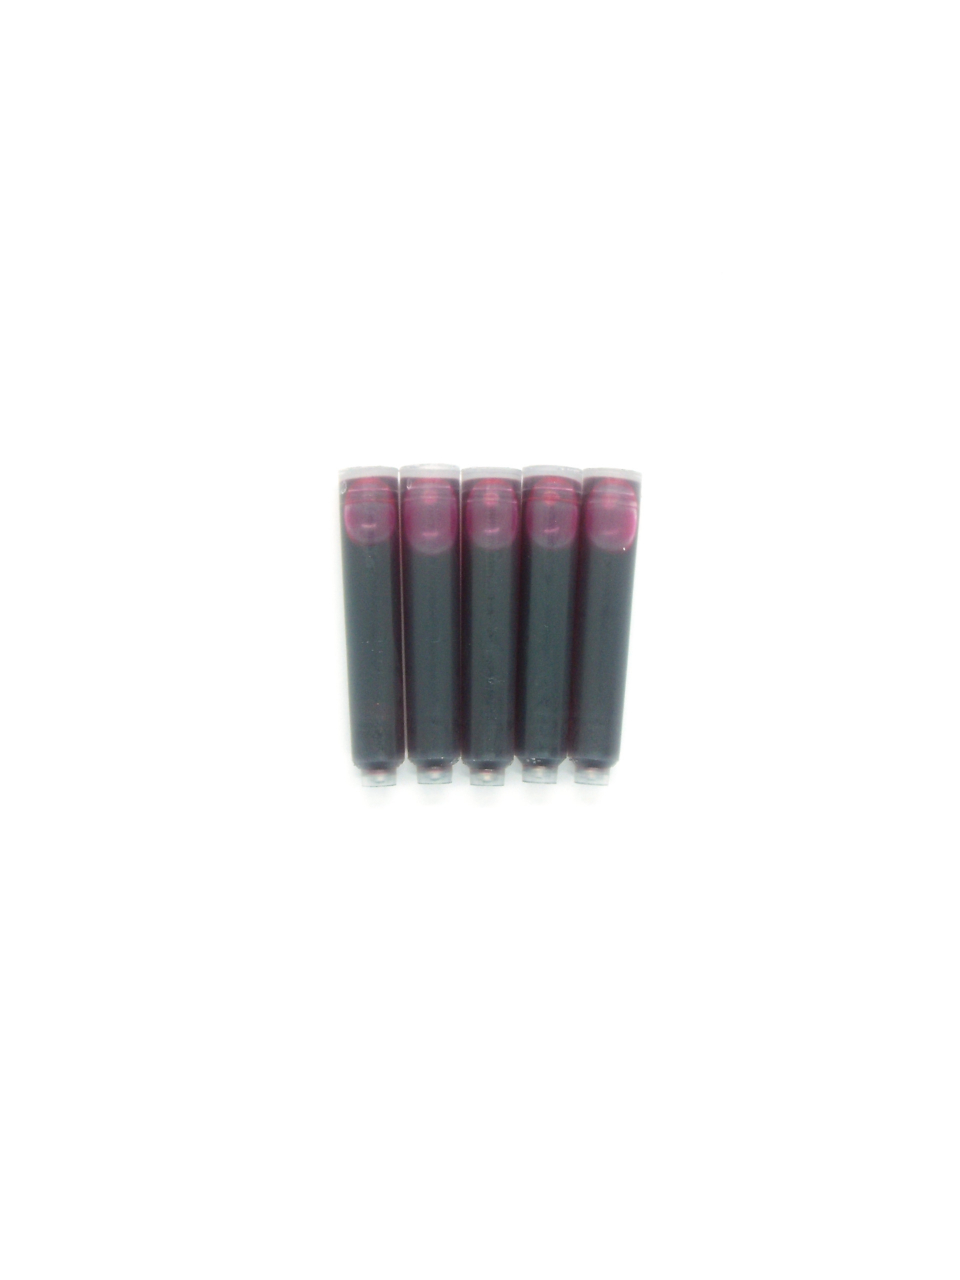 PenConverter Ink Cartridges For Bexley Fountain Pens (Pink)